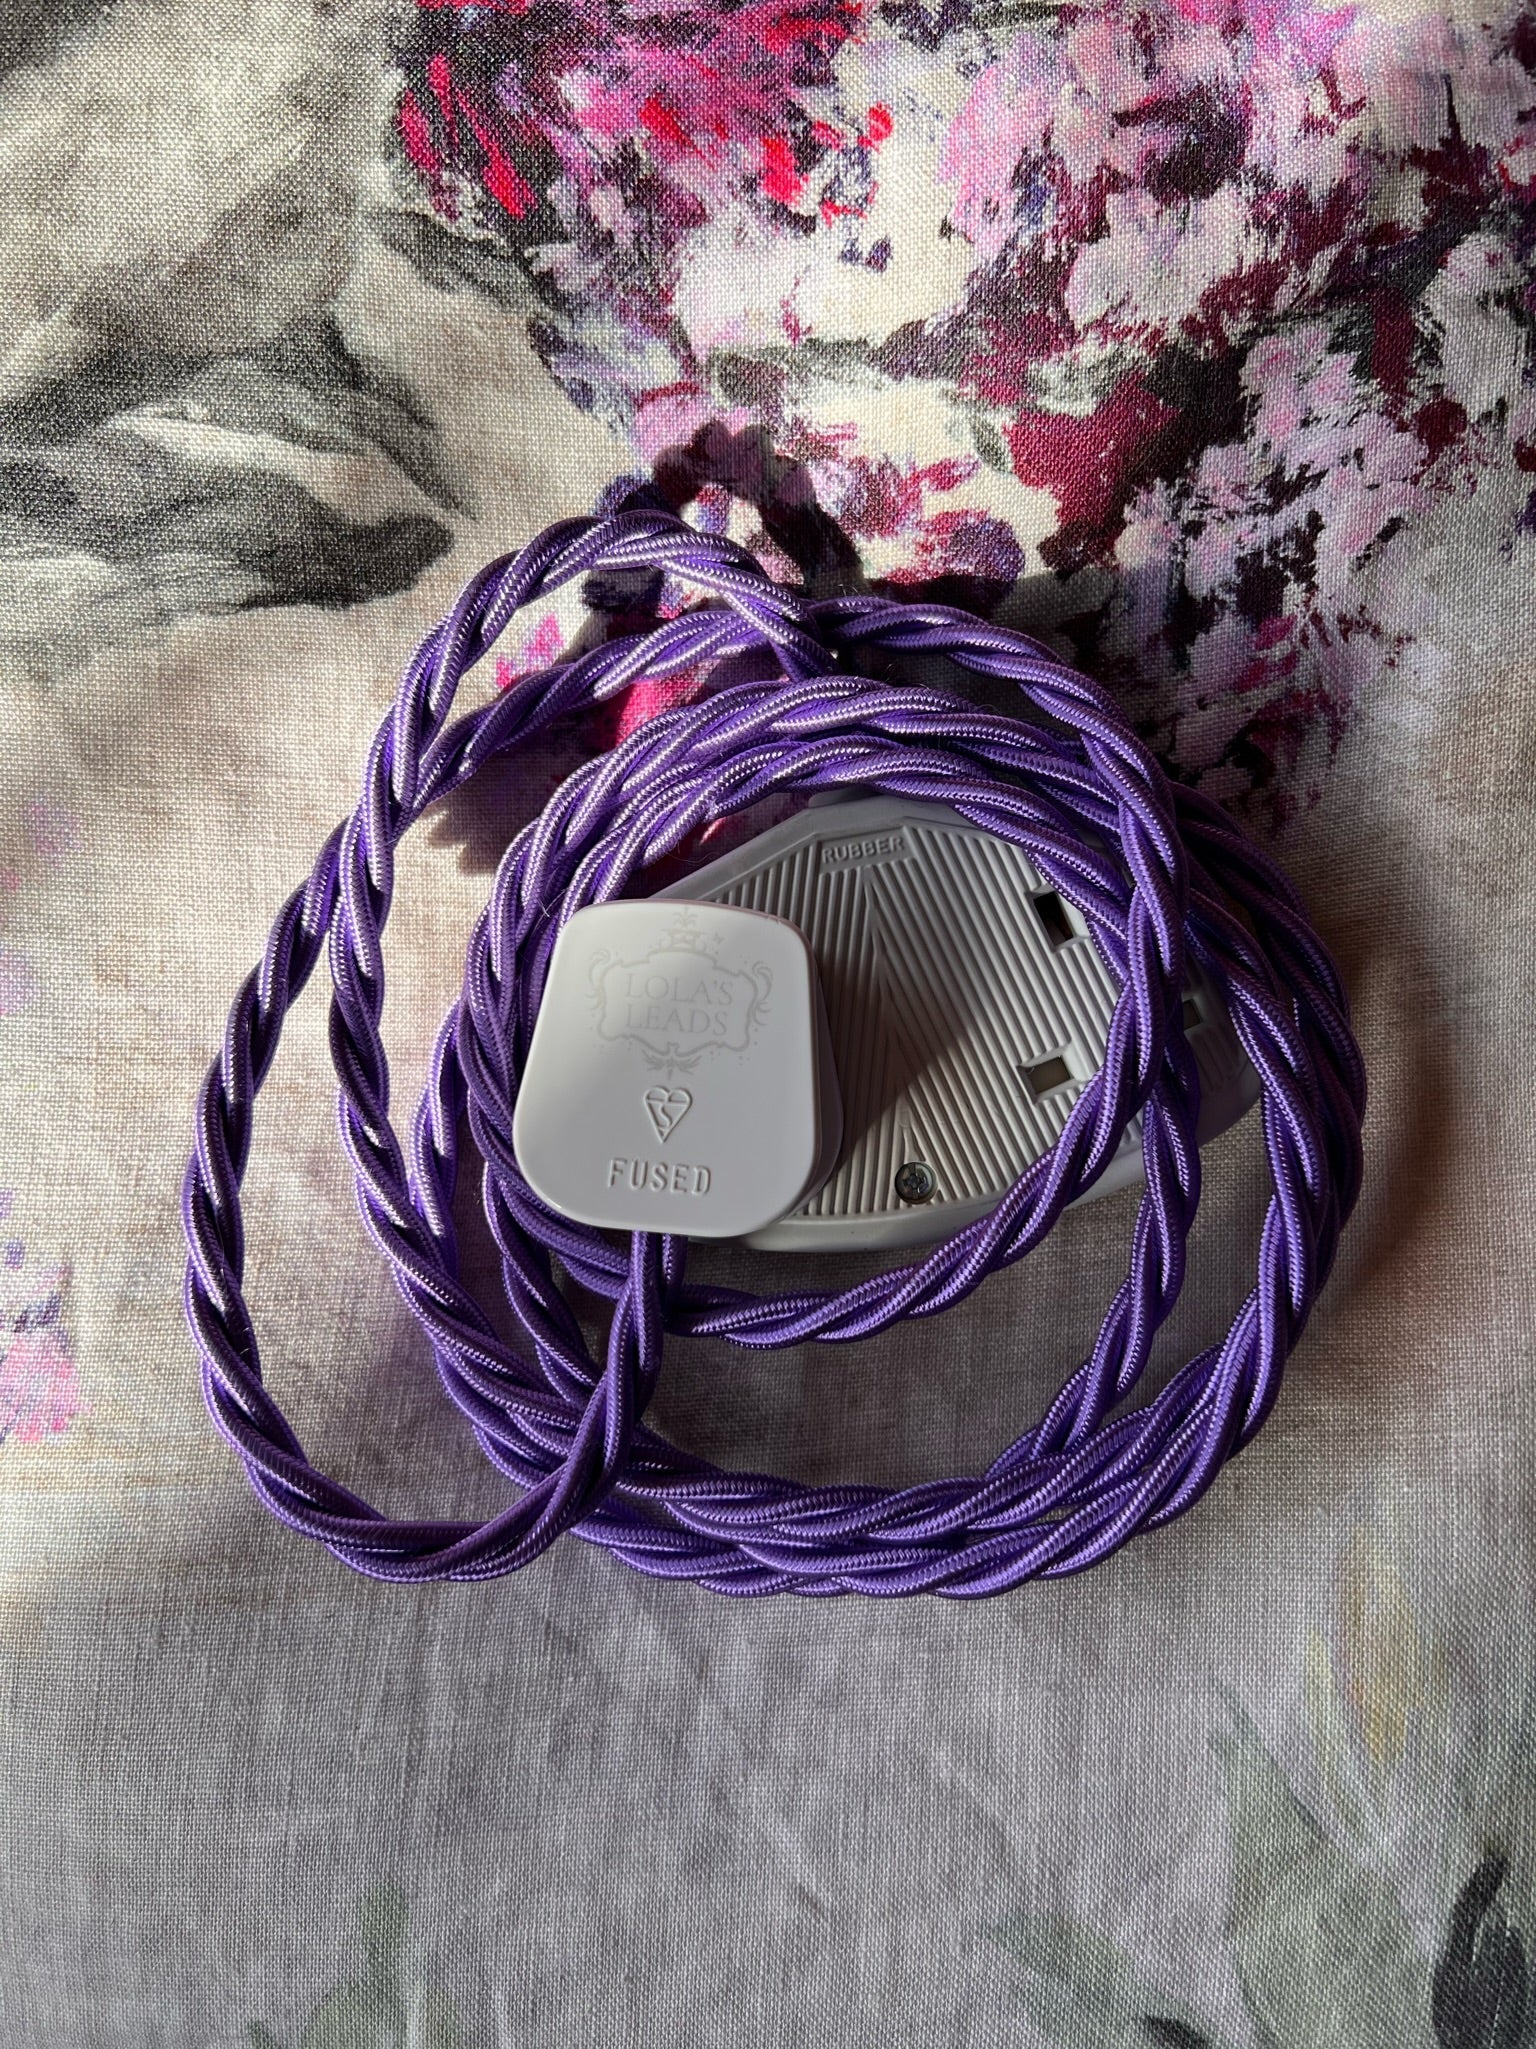 Lola's Leads Violet Purple Fabric Covered Extension Cable